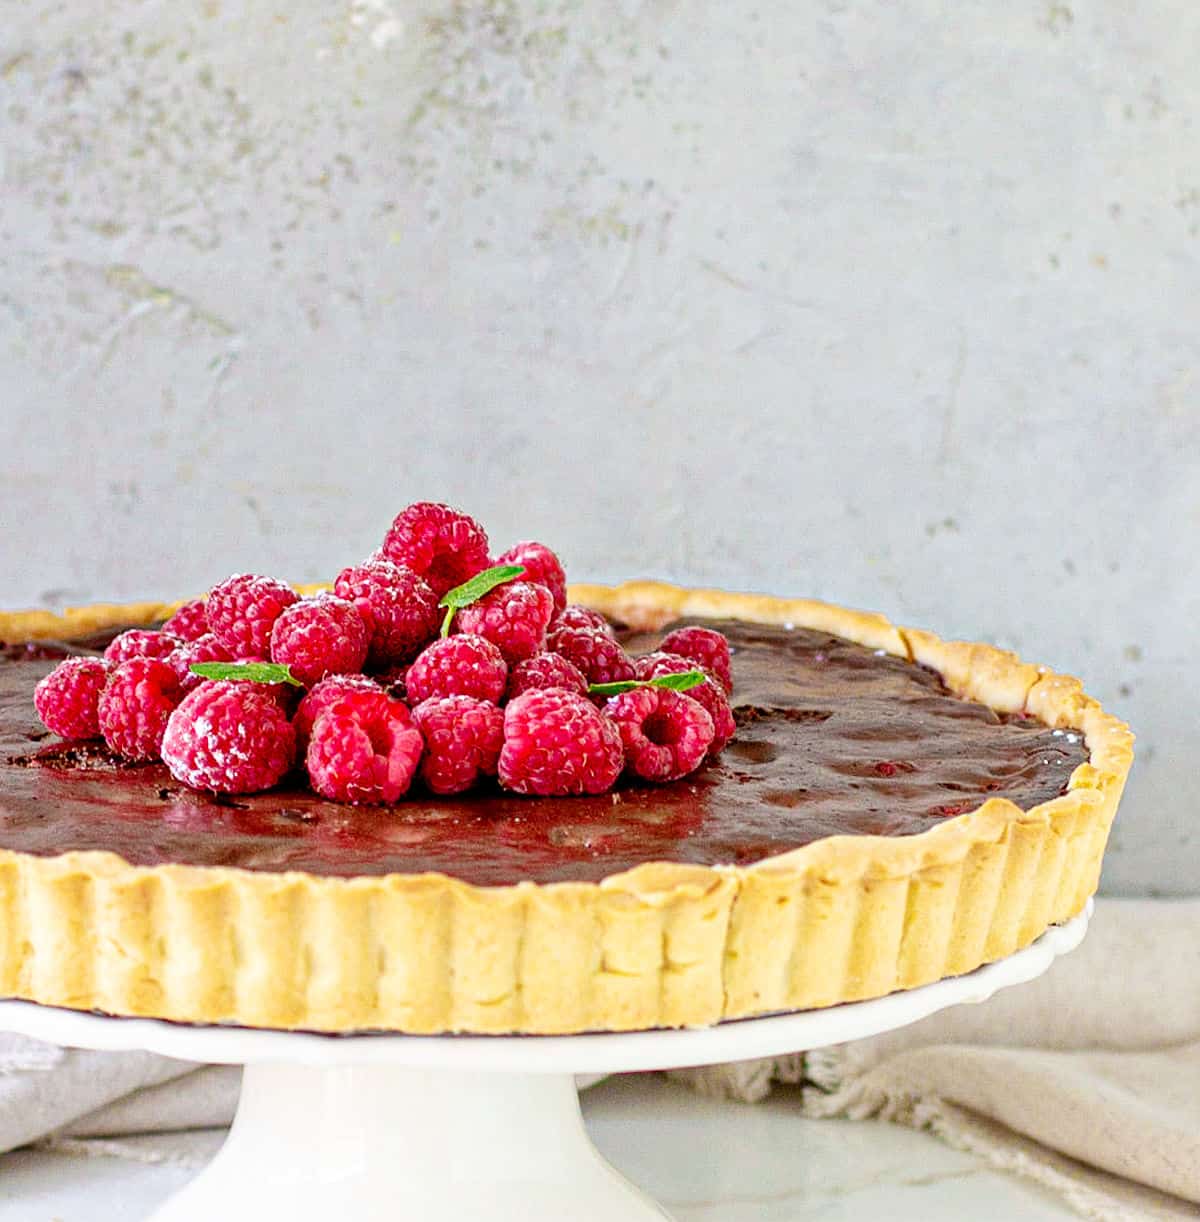 Partial image of chocolate tart on white cake stand, whole raspberries on top.